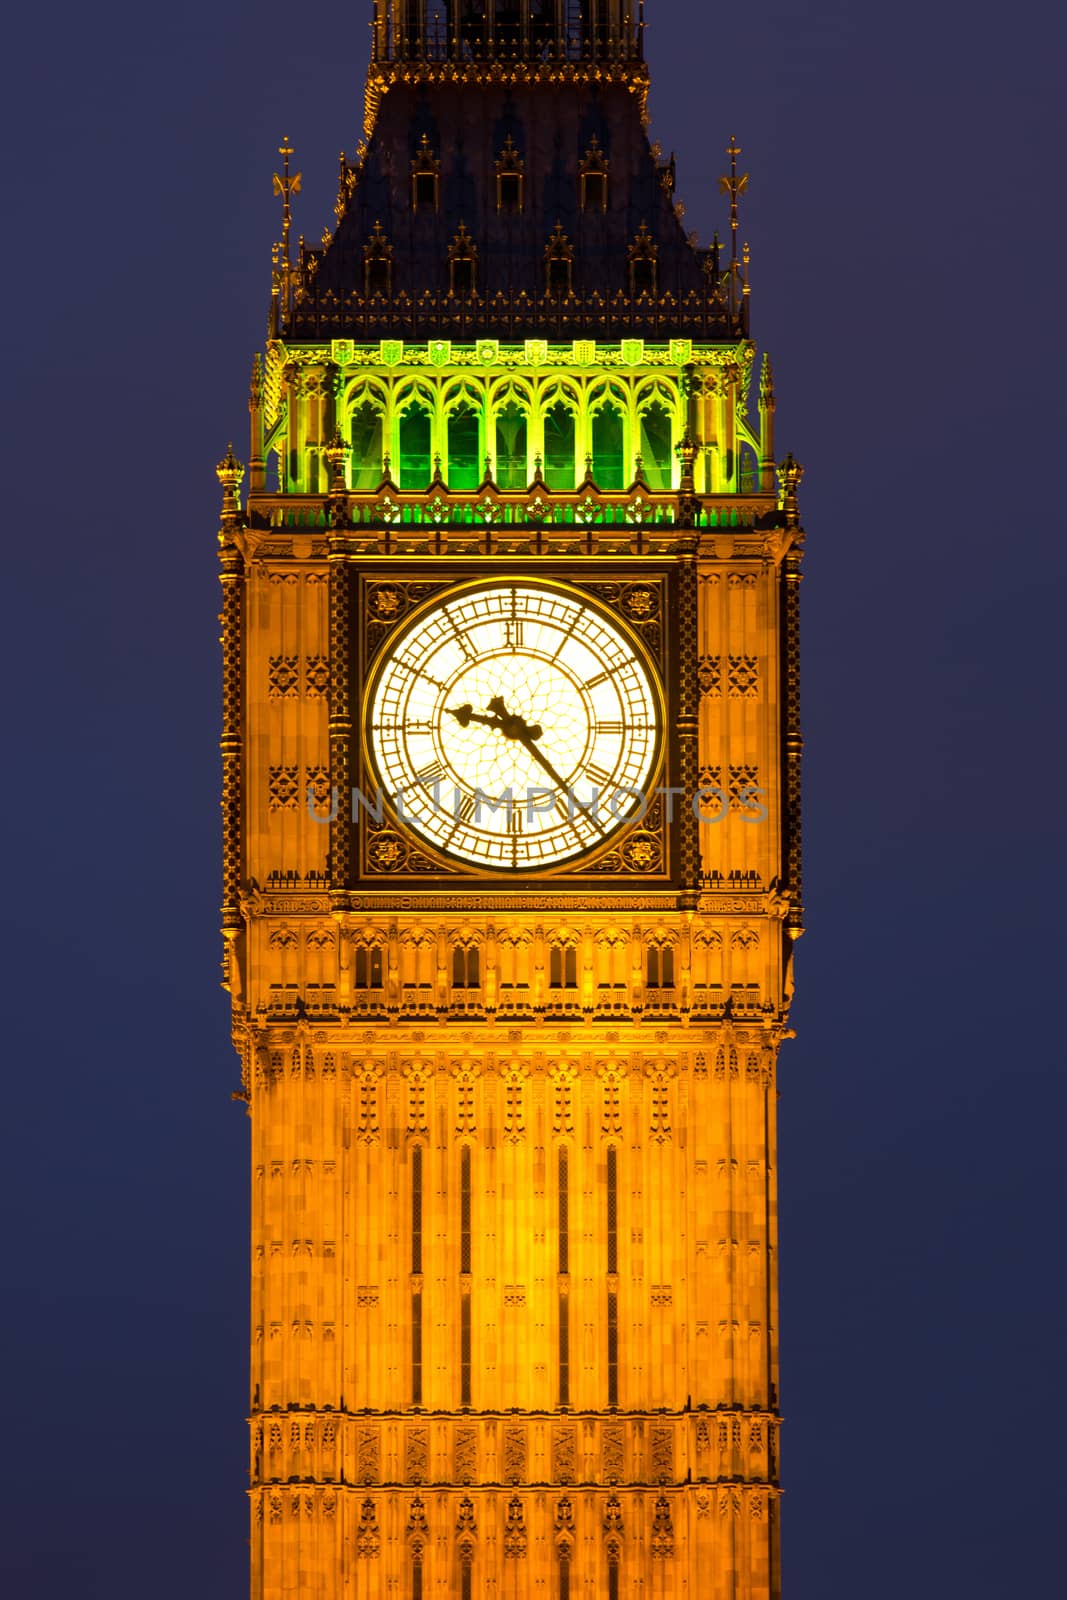 The famous clocktower of the Houses of Parliament in London